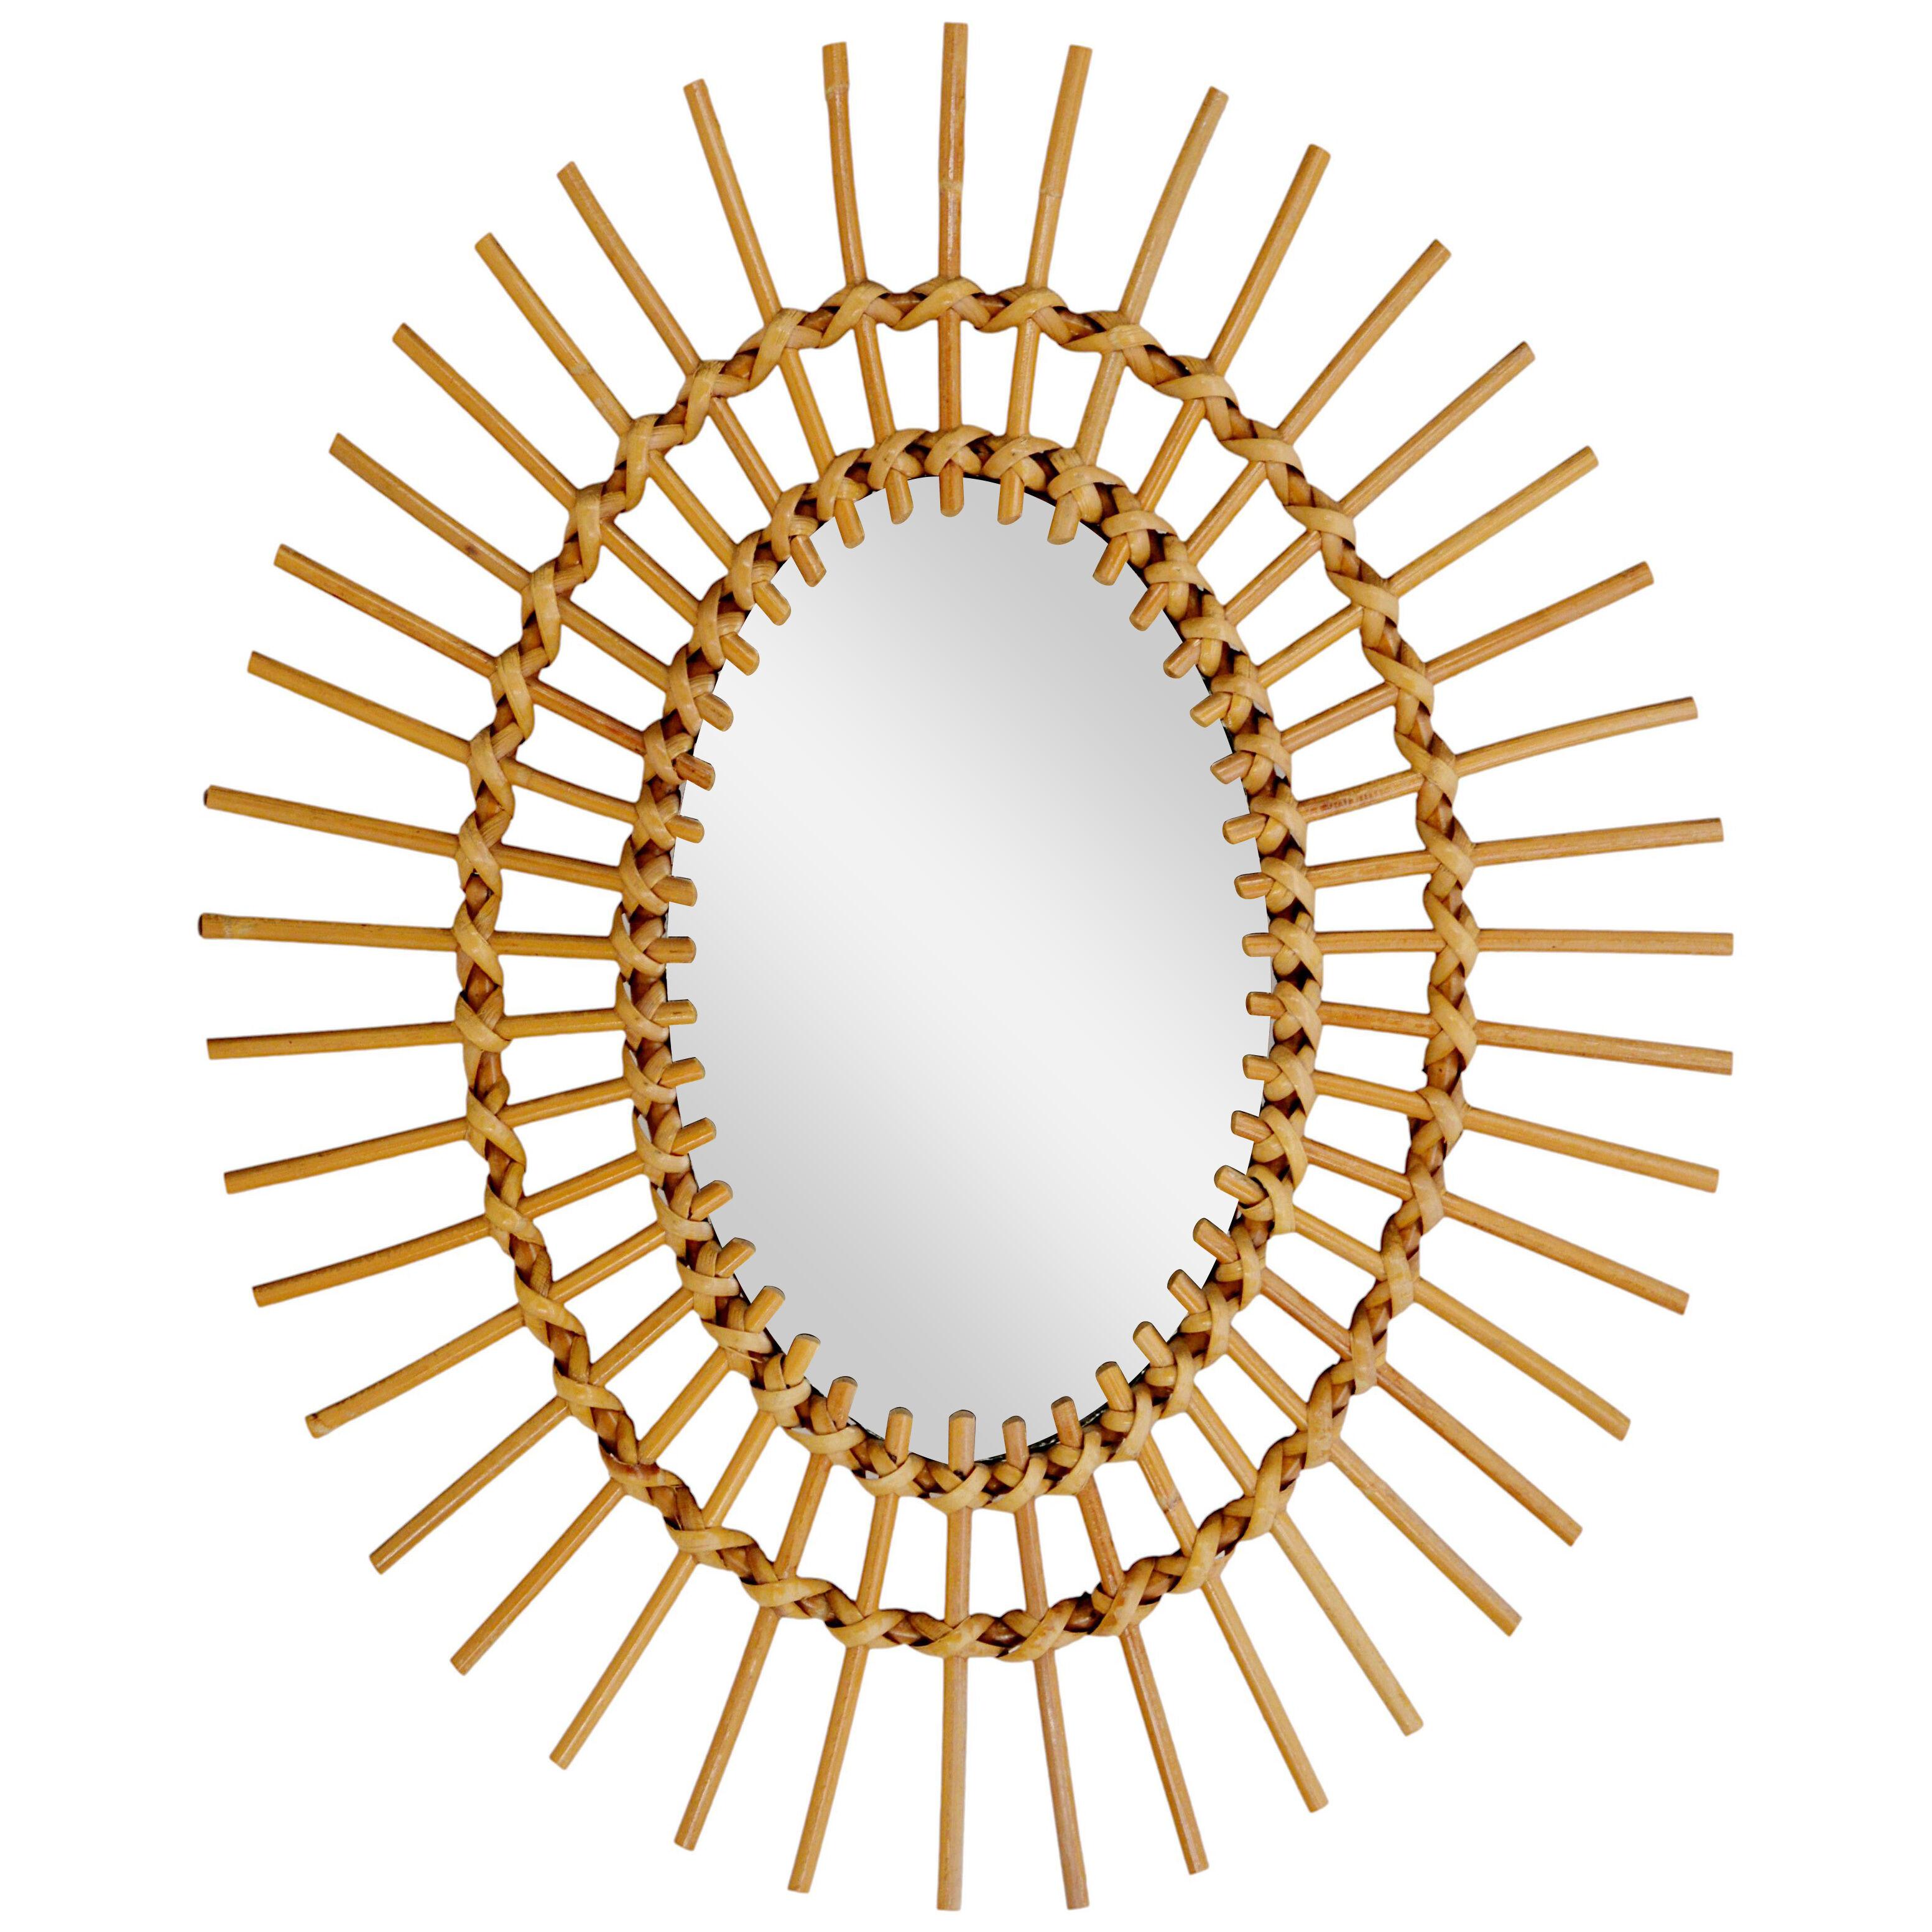 French Mid-century Bamboo & Rattan Wall Mirror, 1950s